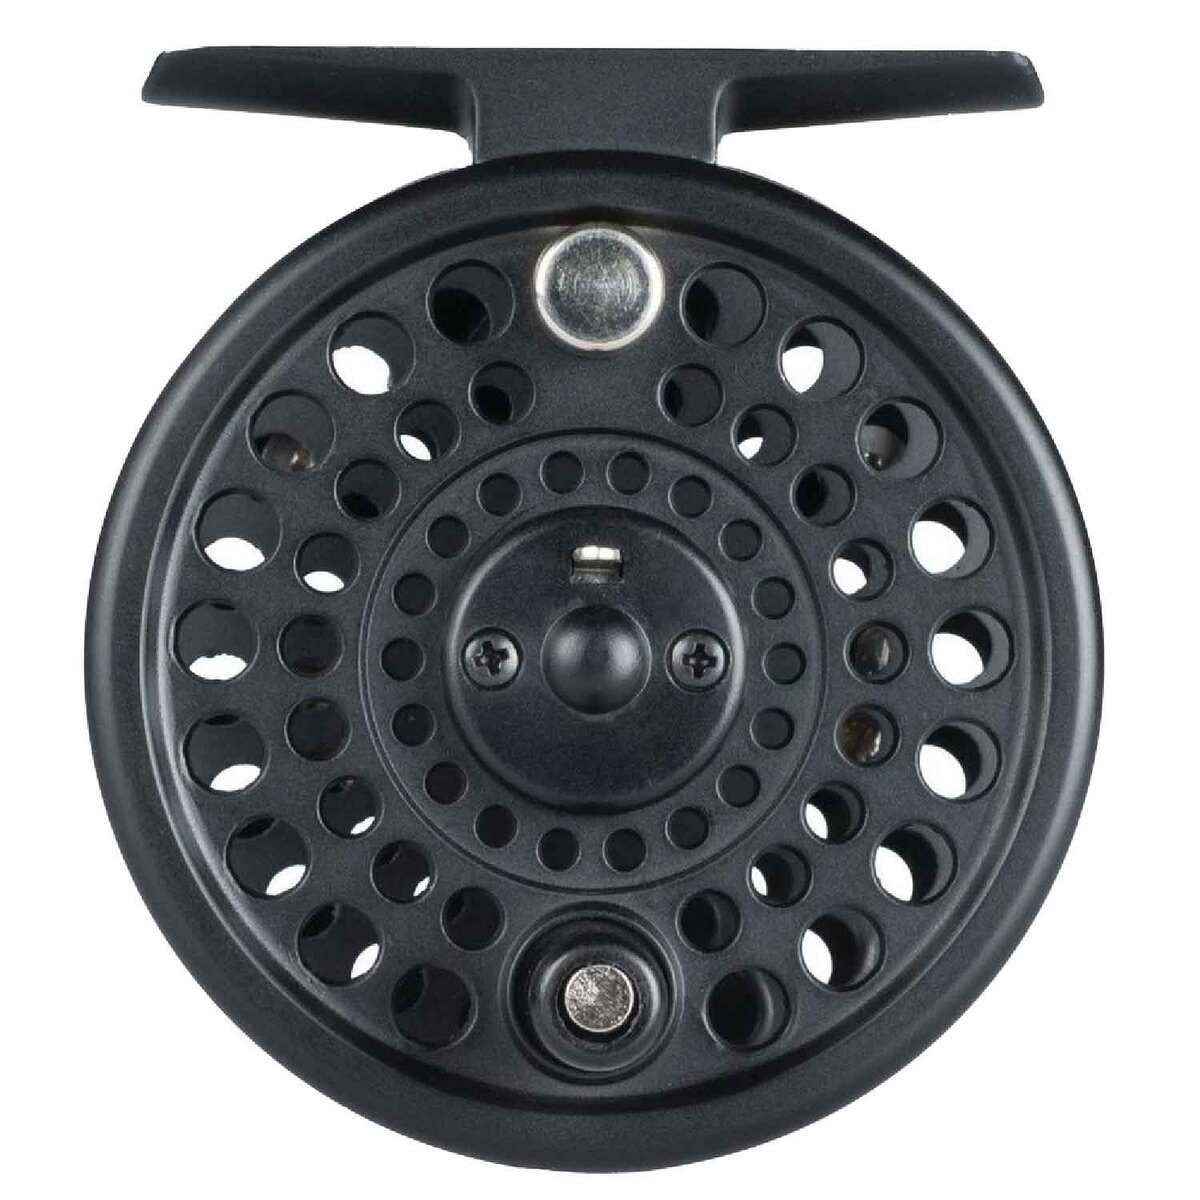 Pfleuger Monarch Fly Fishing Reel